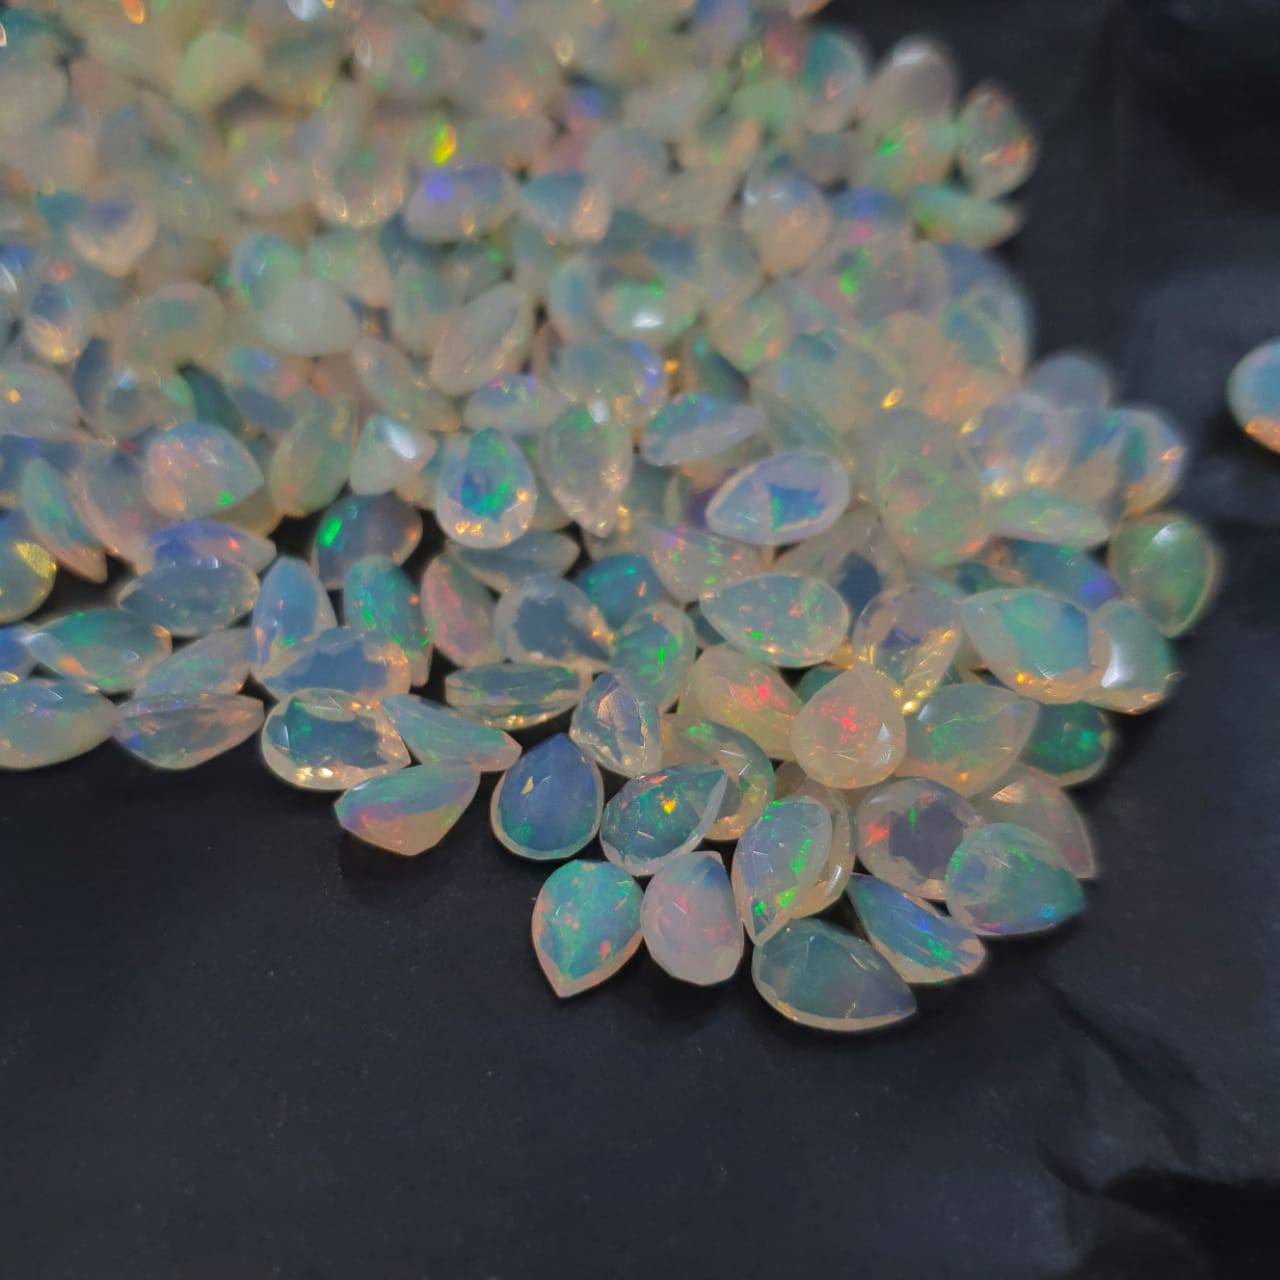 10 Pcs Opal Faceted Pears | Natural Opal 7x5mm Calibrated - The LabradoriteKing